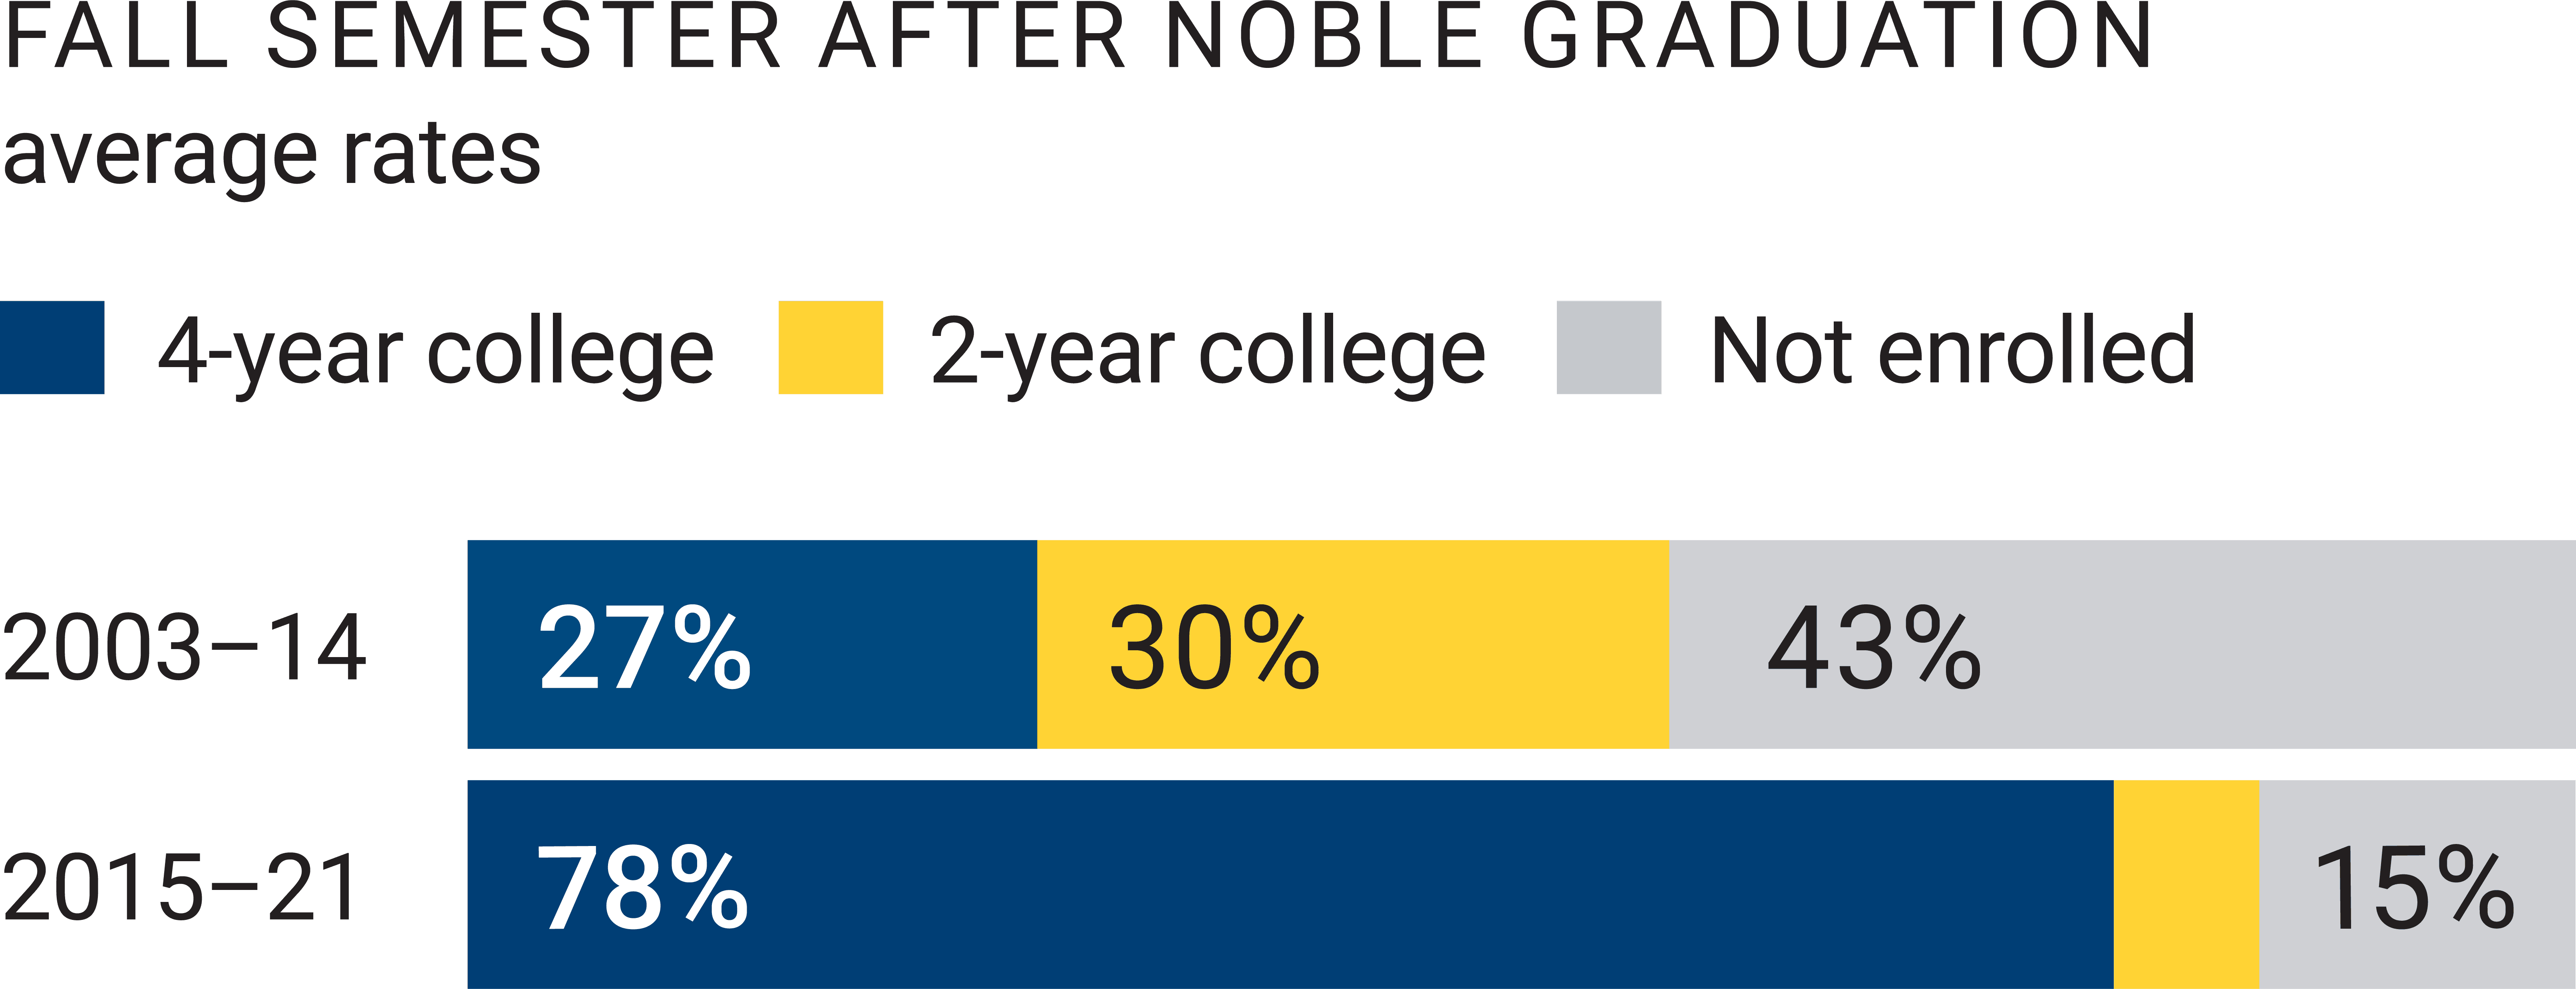 At the top of this graphic, there is a title that reads "Fall Semester After Noble Graduation Average Rates". Under that is a key with three items. The first item has a blue square with the words “four year college" next to it, indicating that the blue on the following graph represents the percentage of undocumented Noble Schools students who enrolled in a four year college program. The second item has a yellow square with the words "two year college" next to it, indicating that the yellow on the following graph represents the percentage of undocumented Noble Schools students who enrolled in a two year college program. The third item has a gray square with the words "not enrolled" next to it, indicating that the gray on the following graph represents the percentage of undocumented Noble Schools students who did not enroll in college at all. Below is a bar graph that has two bars – one for the years 2003 to 2014 and the second one for the years 2015 to 2021. Each bar is separated into three sections of color based on the key, showing the percentage of undocumented Noble students who enrolled in a four year college program, a two year college program, and those that did not enroll at all. In the years 2003 to 2014, the graph shows that 27 percent of undocumented students enrolled in a four year program, 30 percent enrolled in a two year program, and 43 percent did not enroll at all. In the years 2015 to 2021, the graph shows that 78 percent of undocumented students enrolled in a four year program, 7 percent enrolled in a two year program, and 15 percent did not enroll at all.